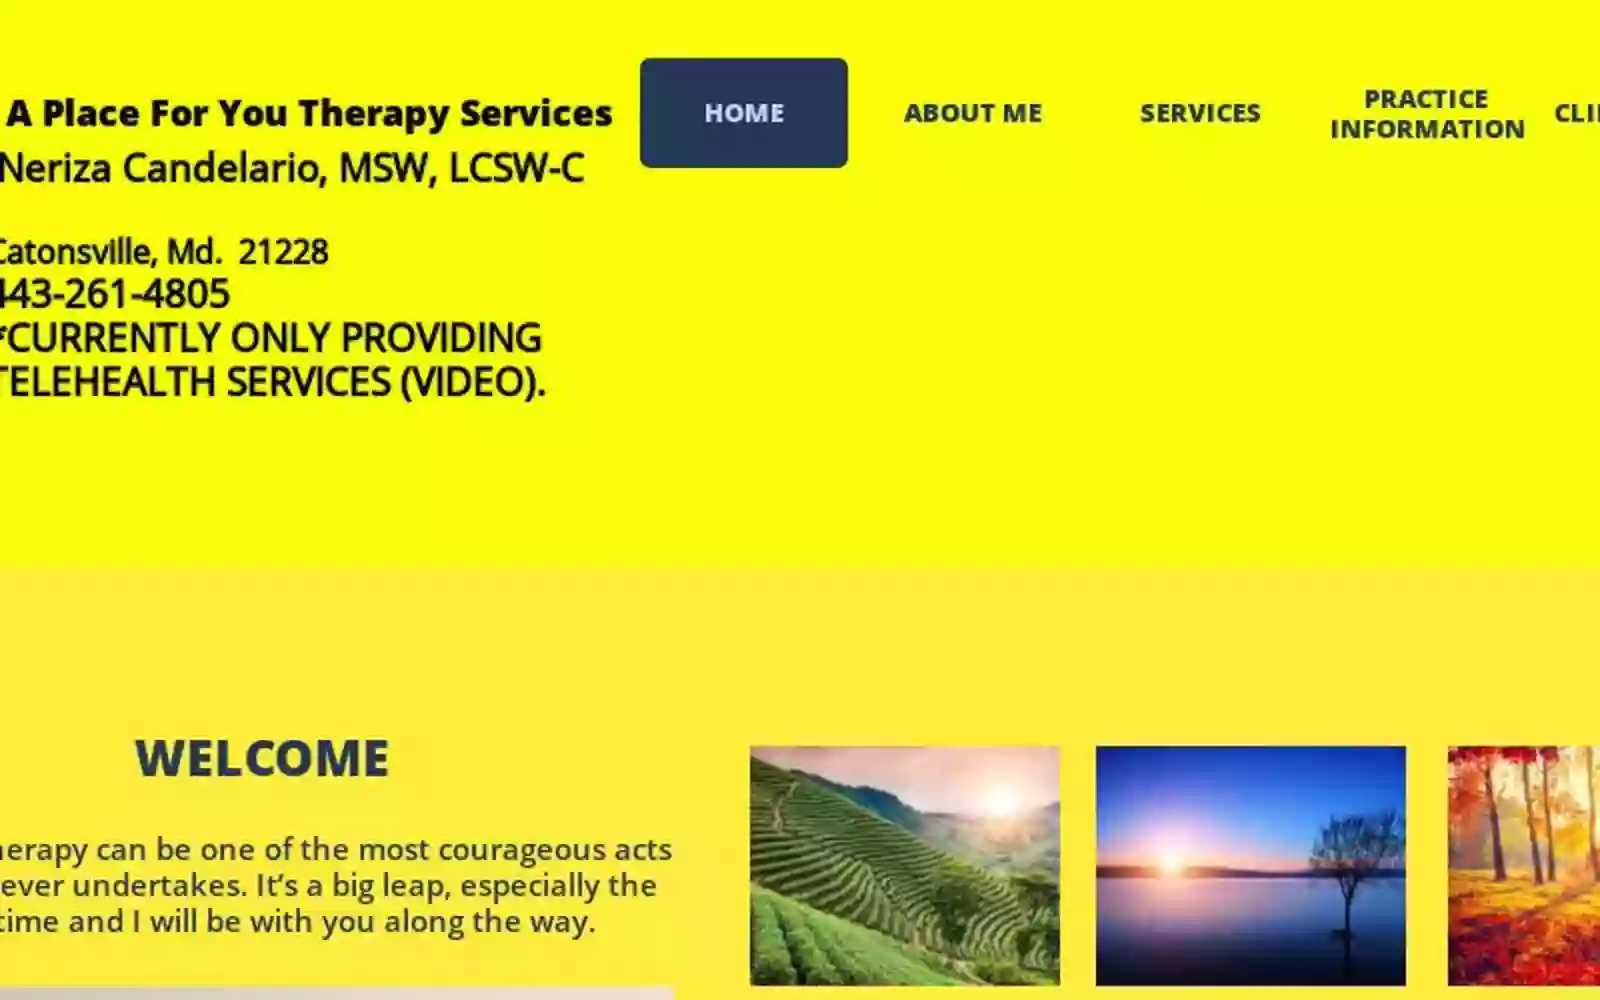 A Place For You: Therapy Services / Neriza Candelario, LCSW-C